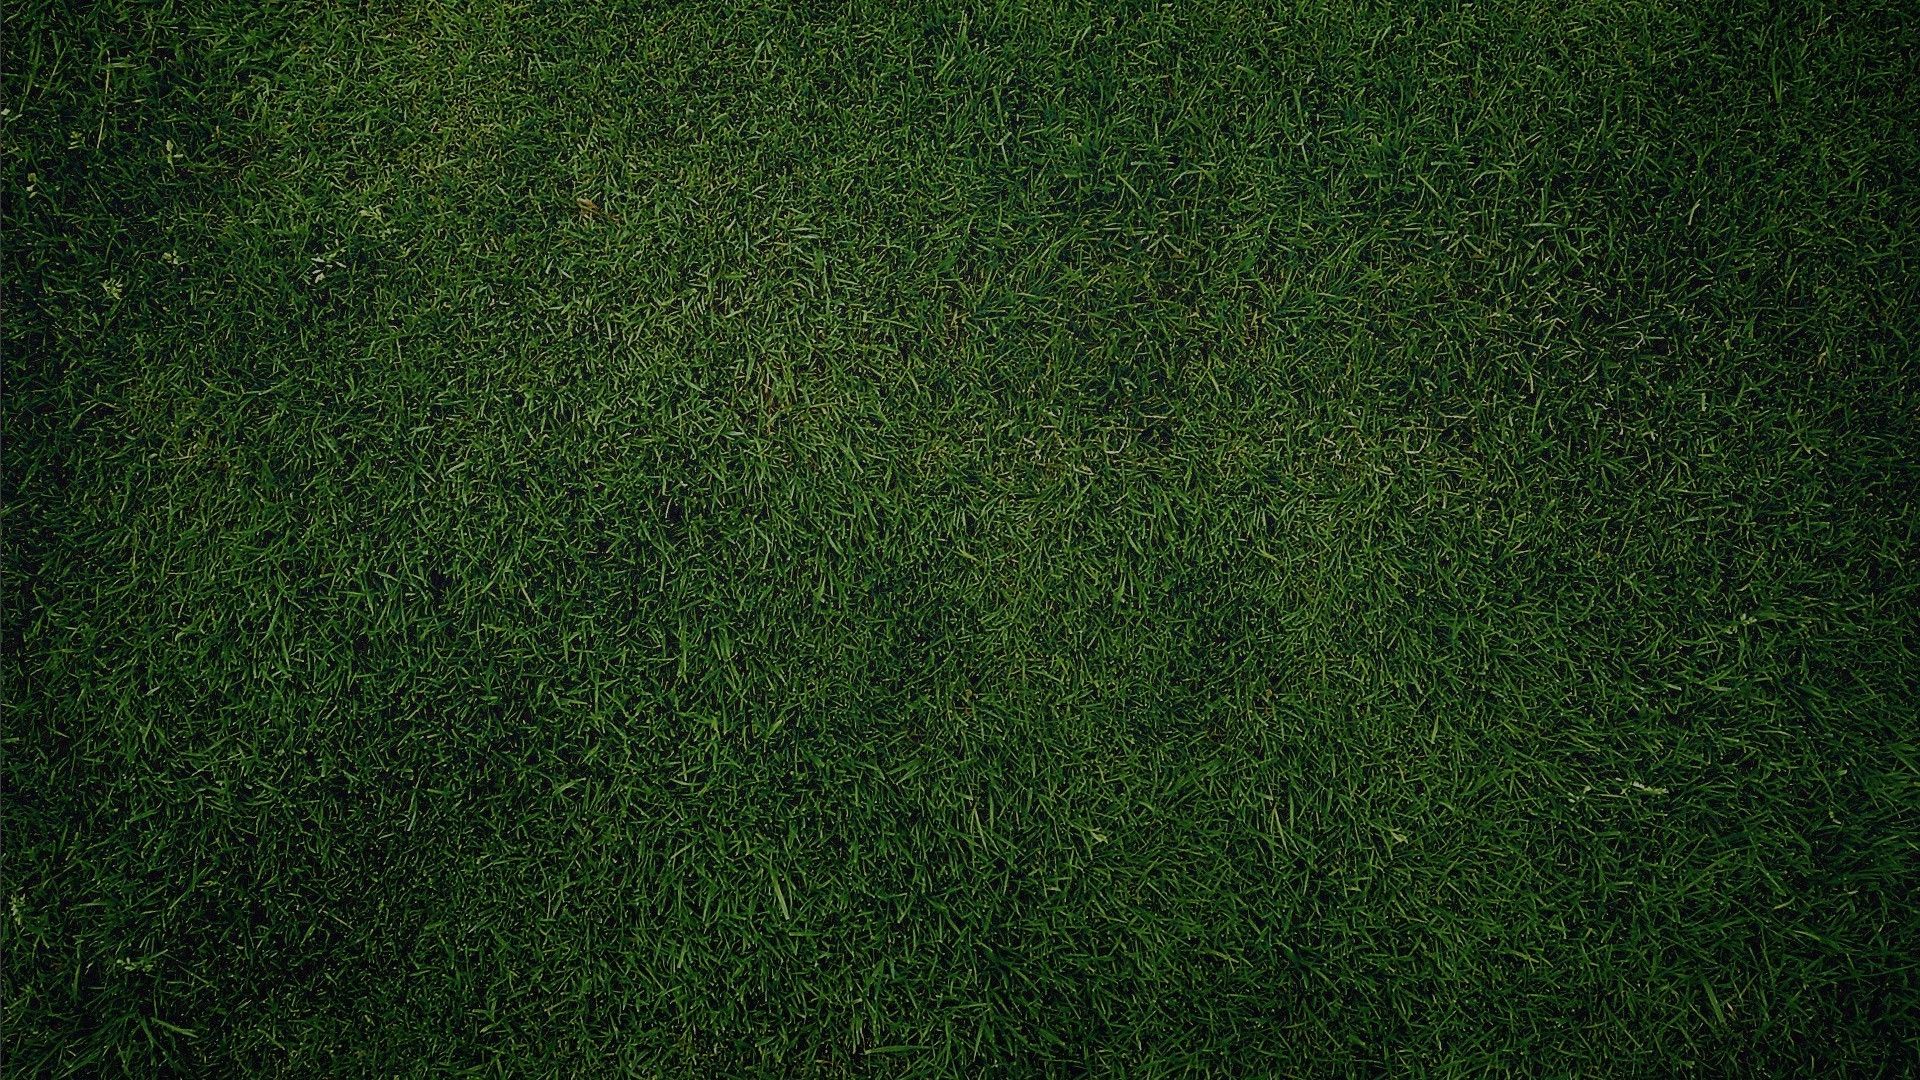 Free download Showing Gallery For Grass Top View Wallpaper HD [1920x1080] for your Desktop, Mobile & Tablet. Explore HD Grass Wallpaper. Green Grass Wallpaper, Grass and Sky Wallpaper, Grass Wallpaper Image